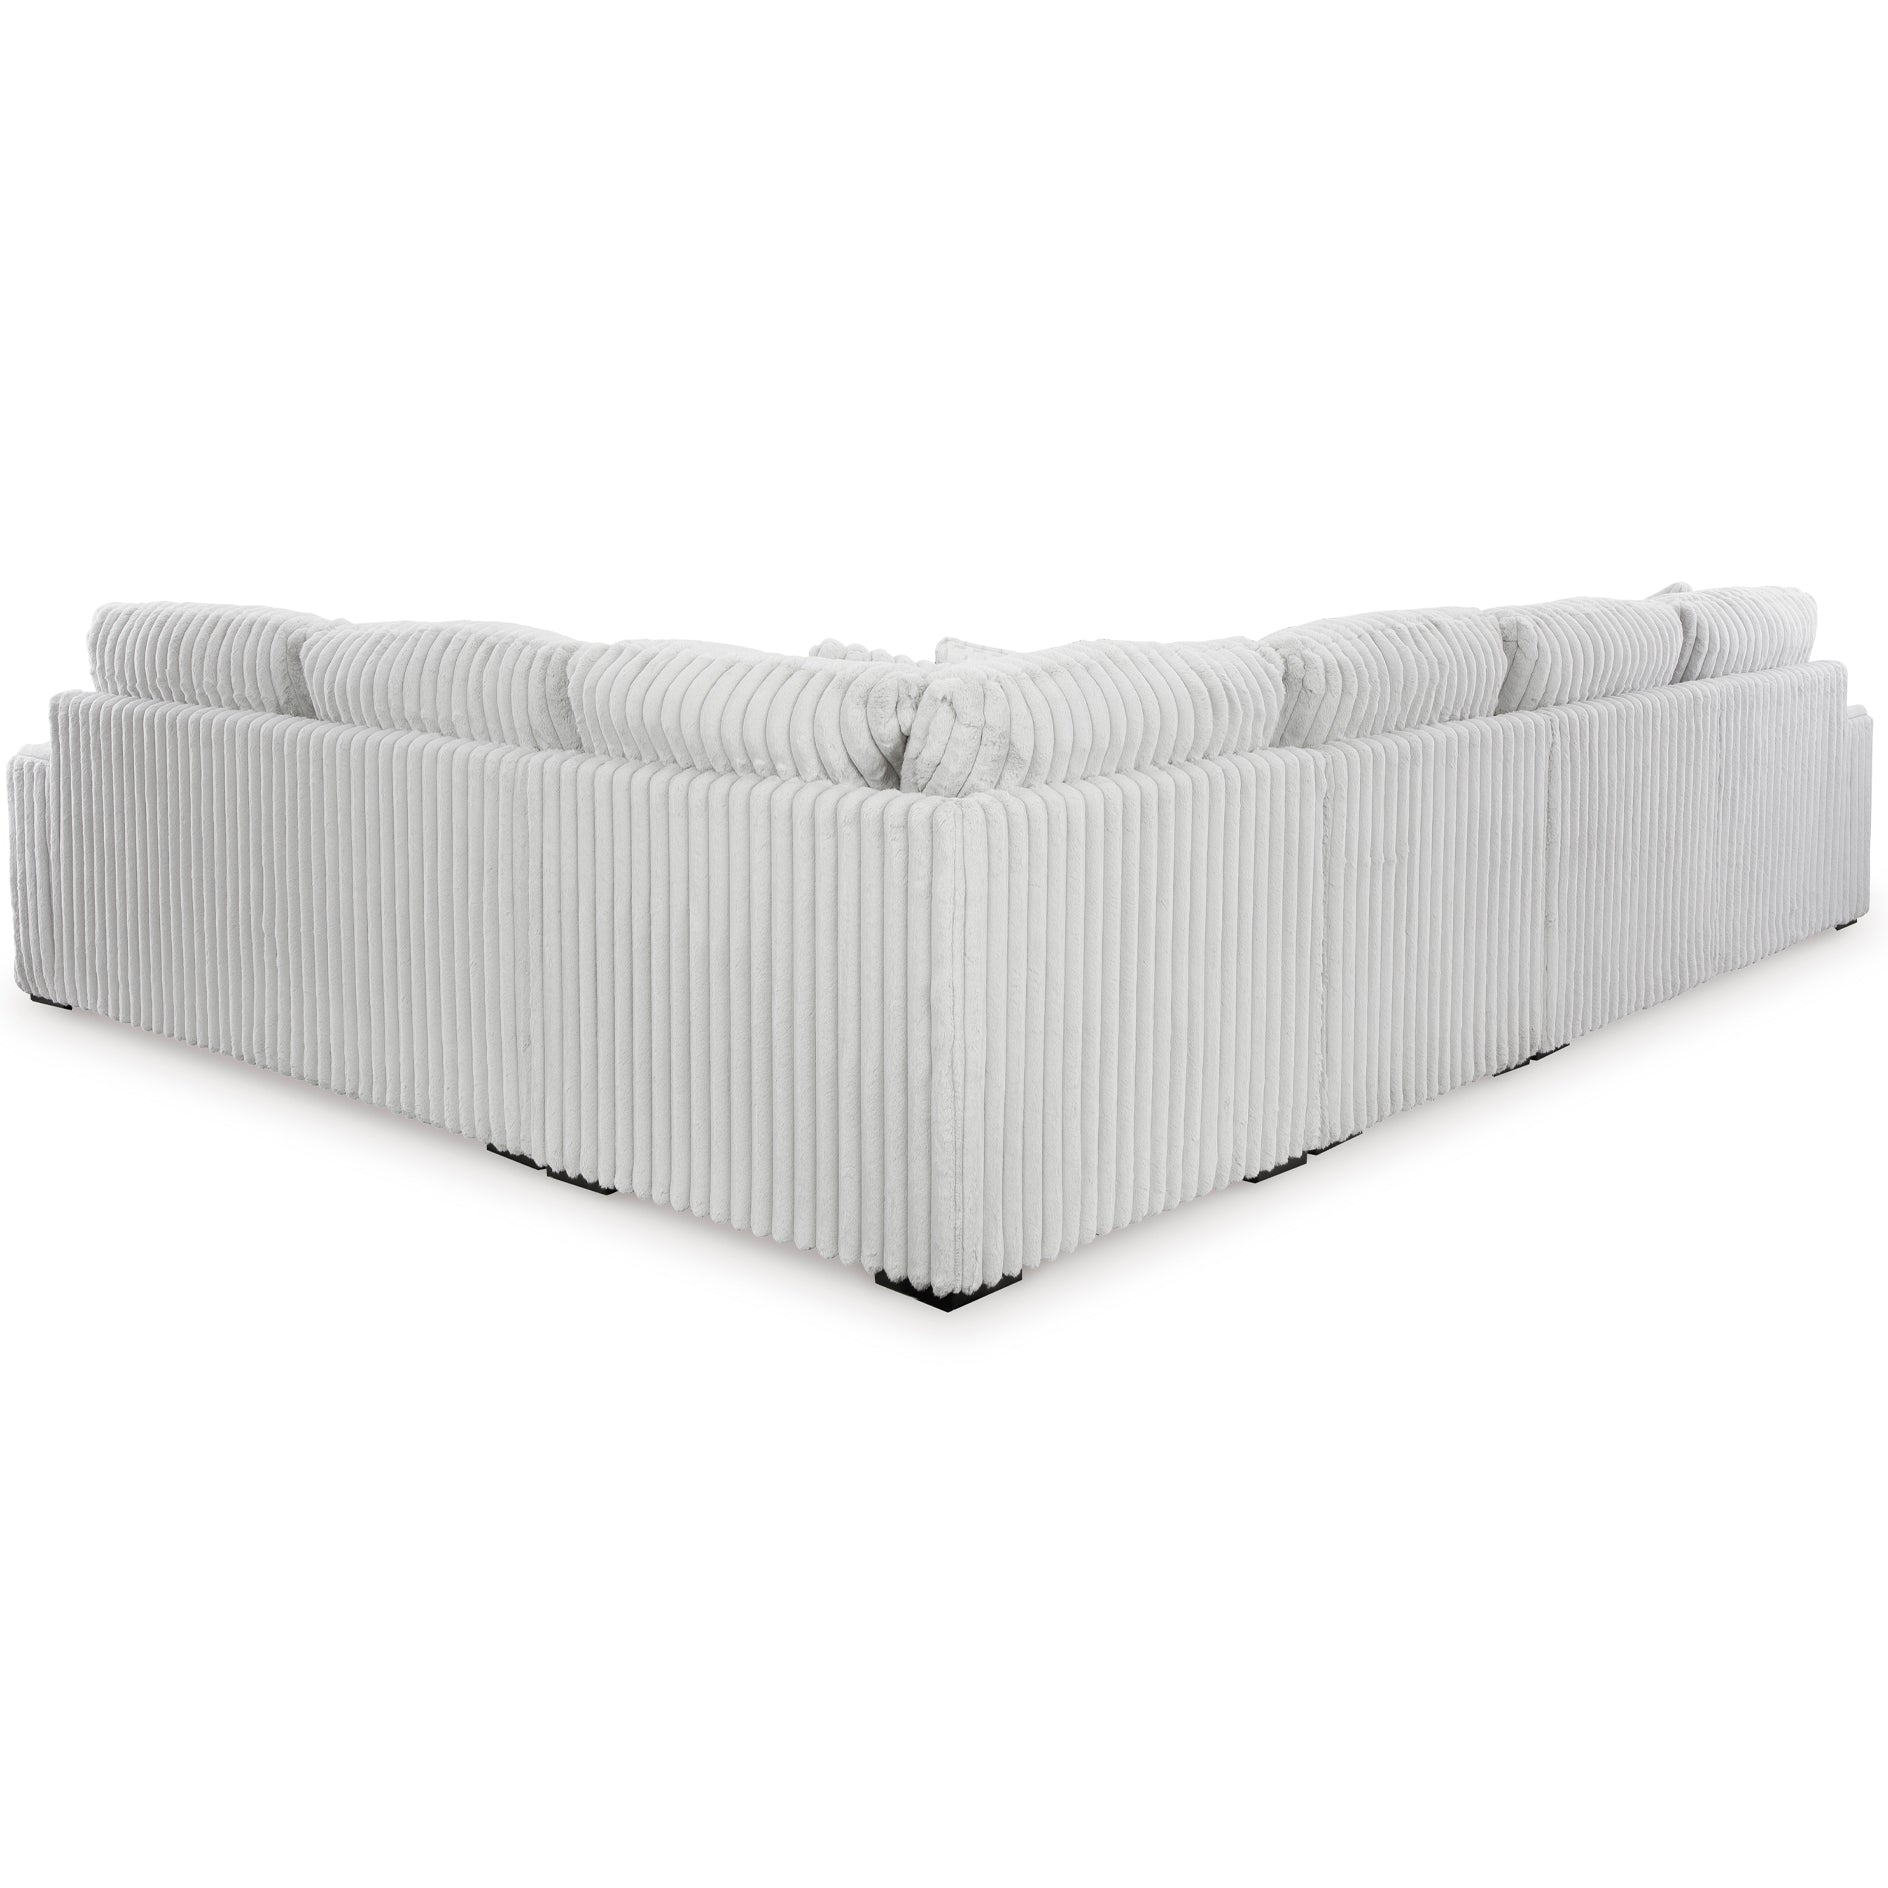 Stupendous 4-Piece Sectional, image of the back